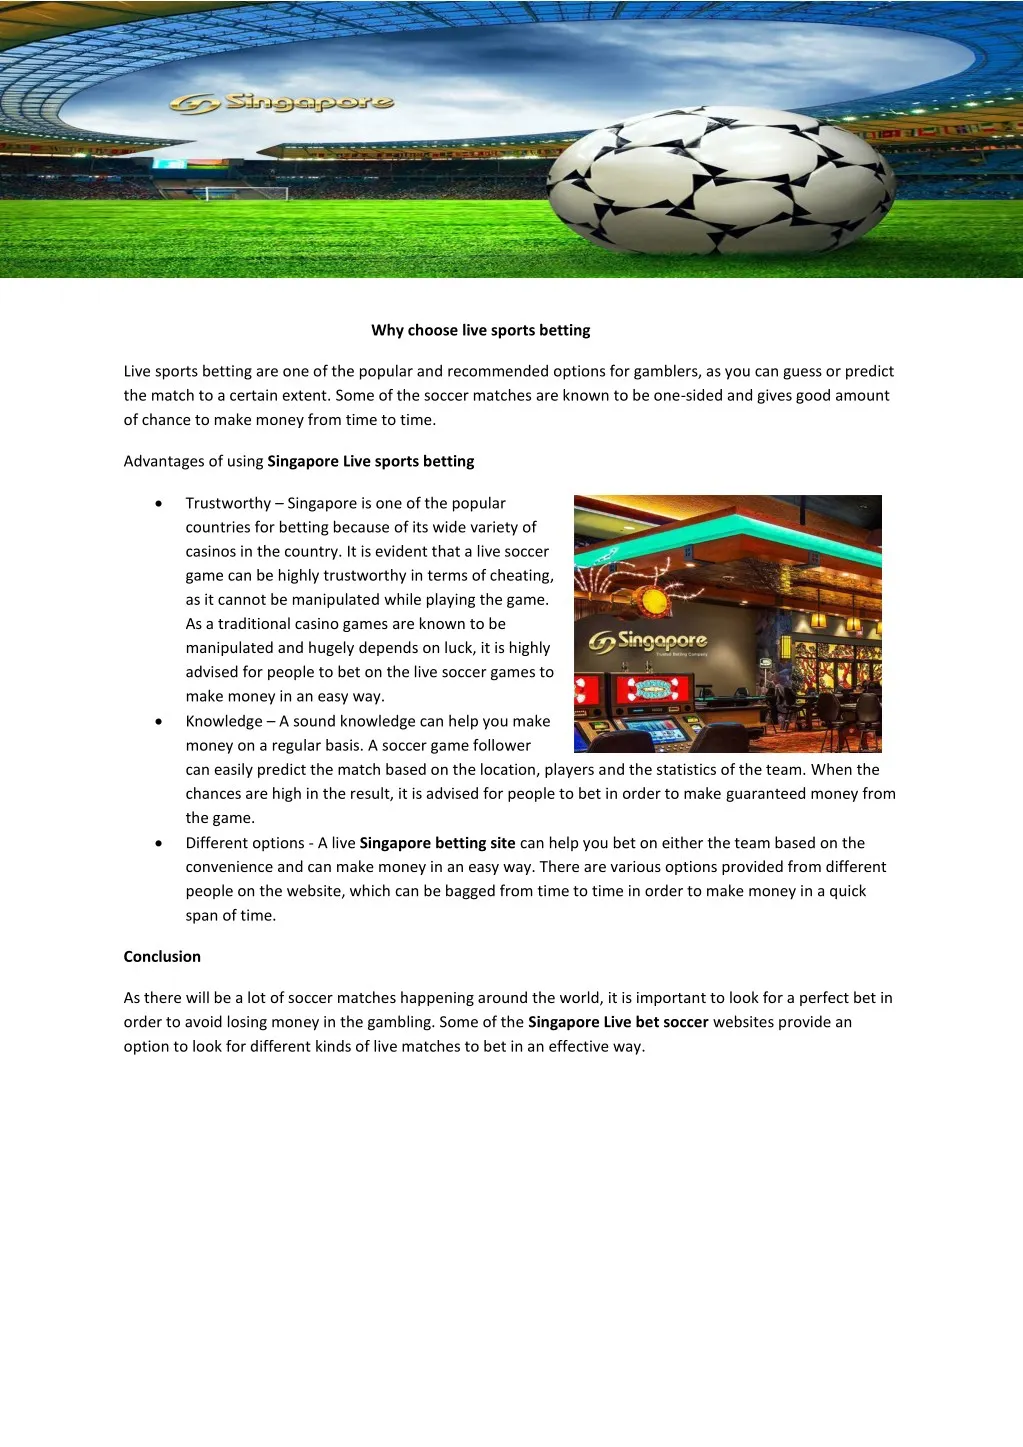 why choose live sports betting